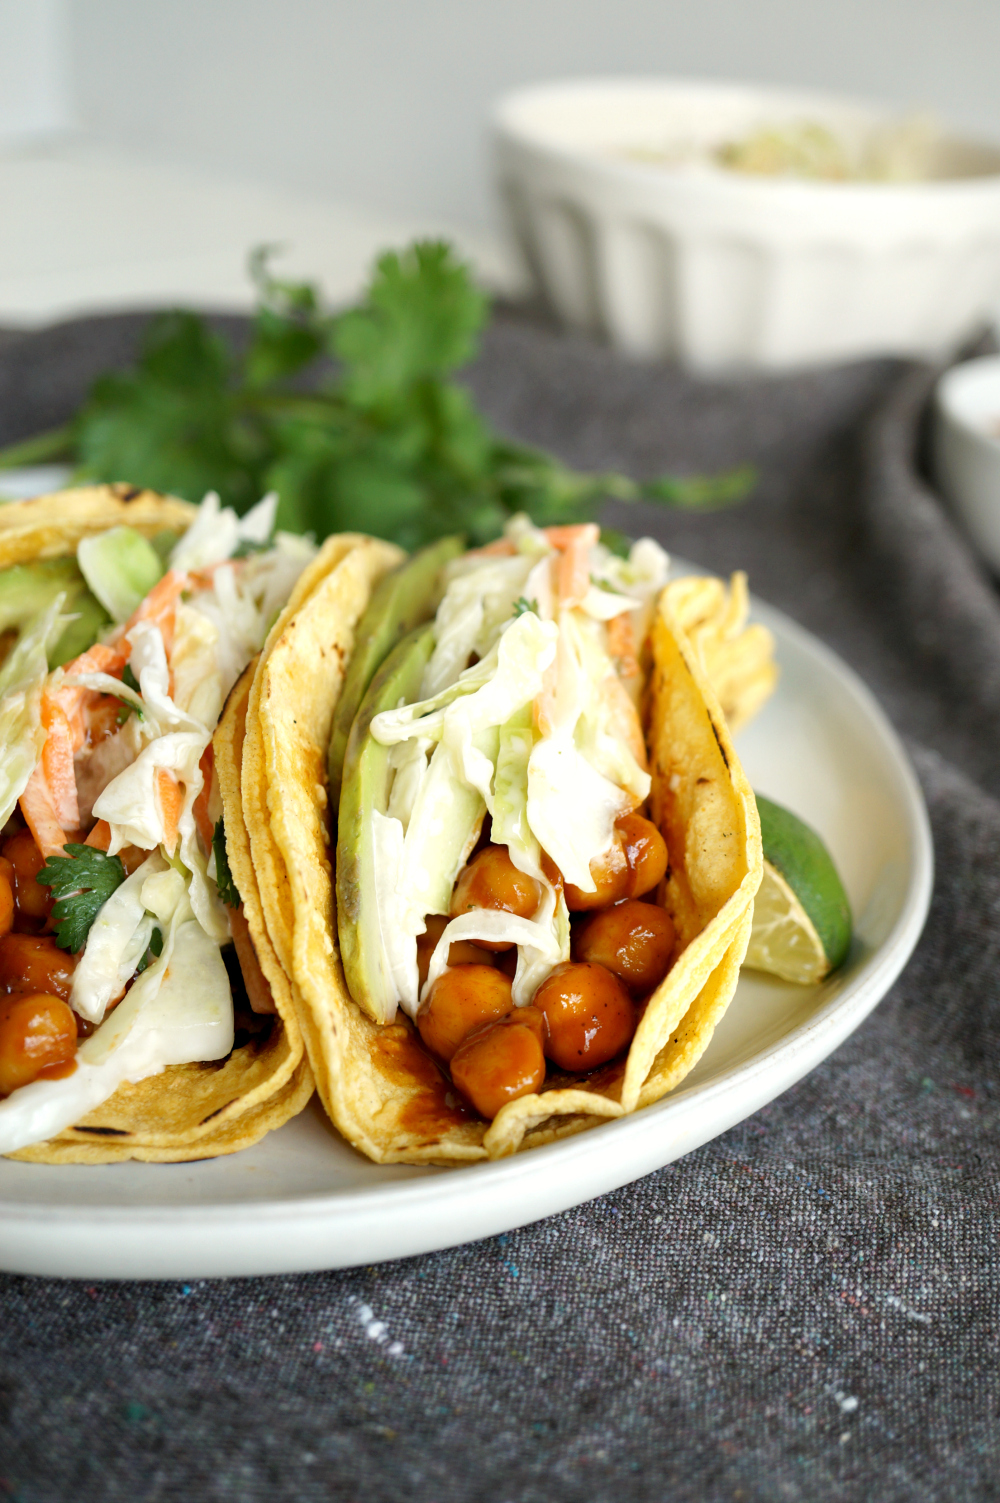 BBQ chickpea taco topped with coleslaw and sliced avocado